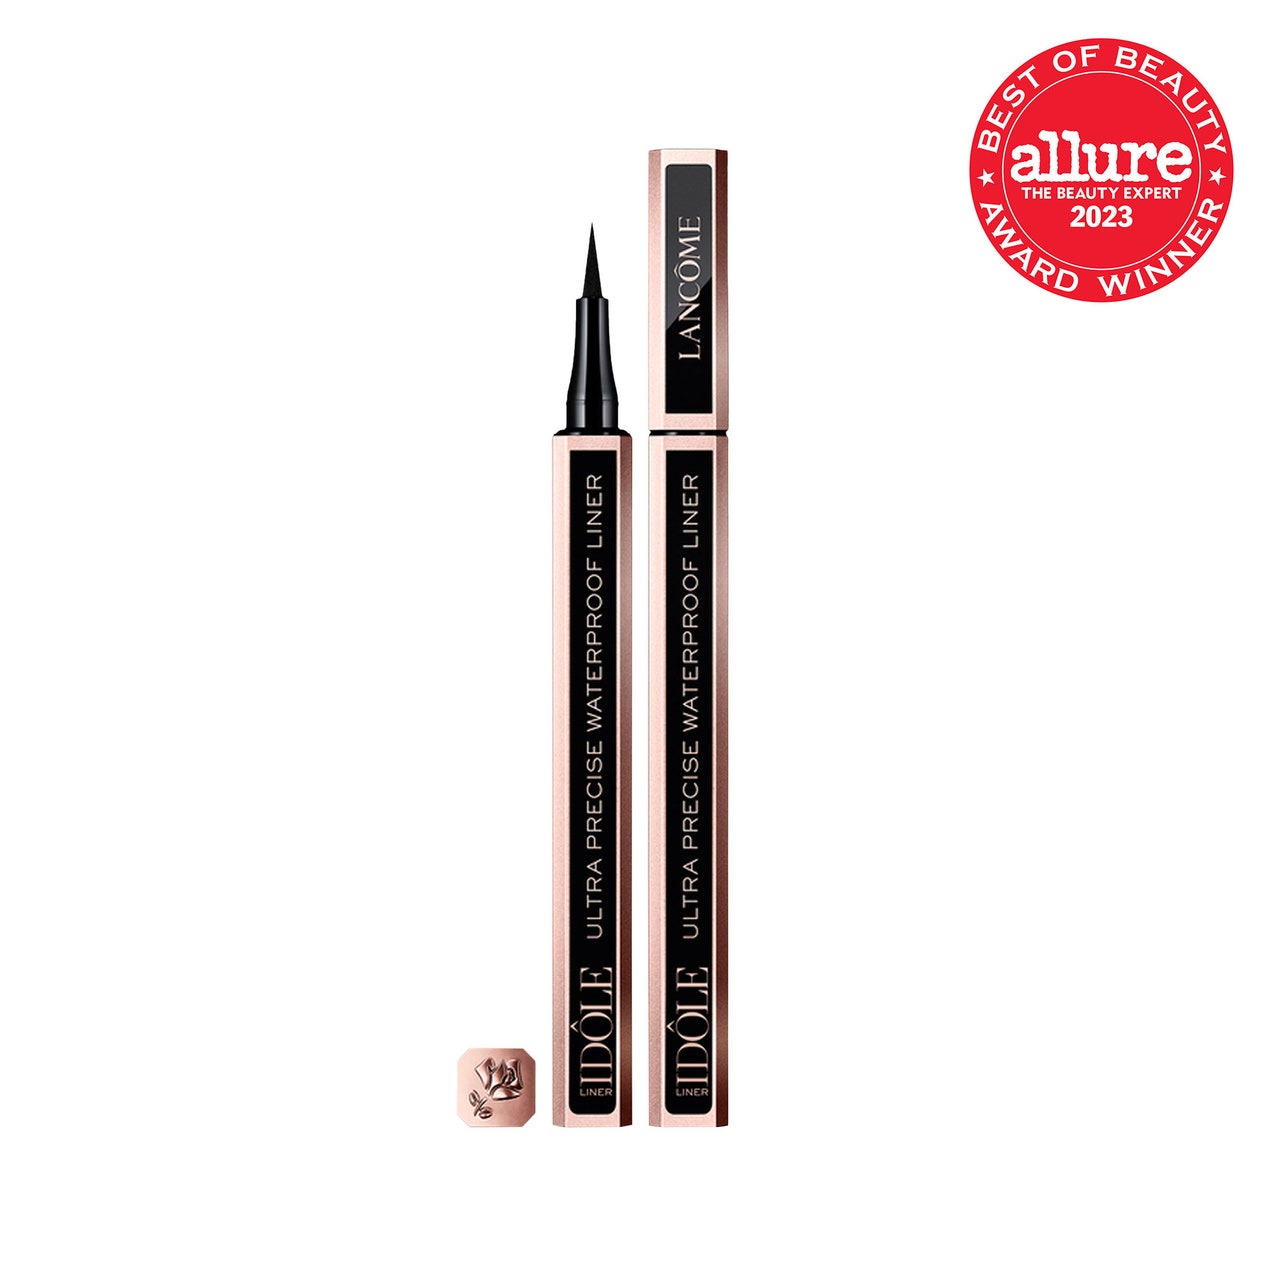 Lancôme Idôle Ultra-Precise Felt Tip Waterproof Liquid Eyeliner black and rose gold liquid eye liner pen on white background with red Allure BoB seal in the top right corner